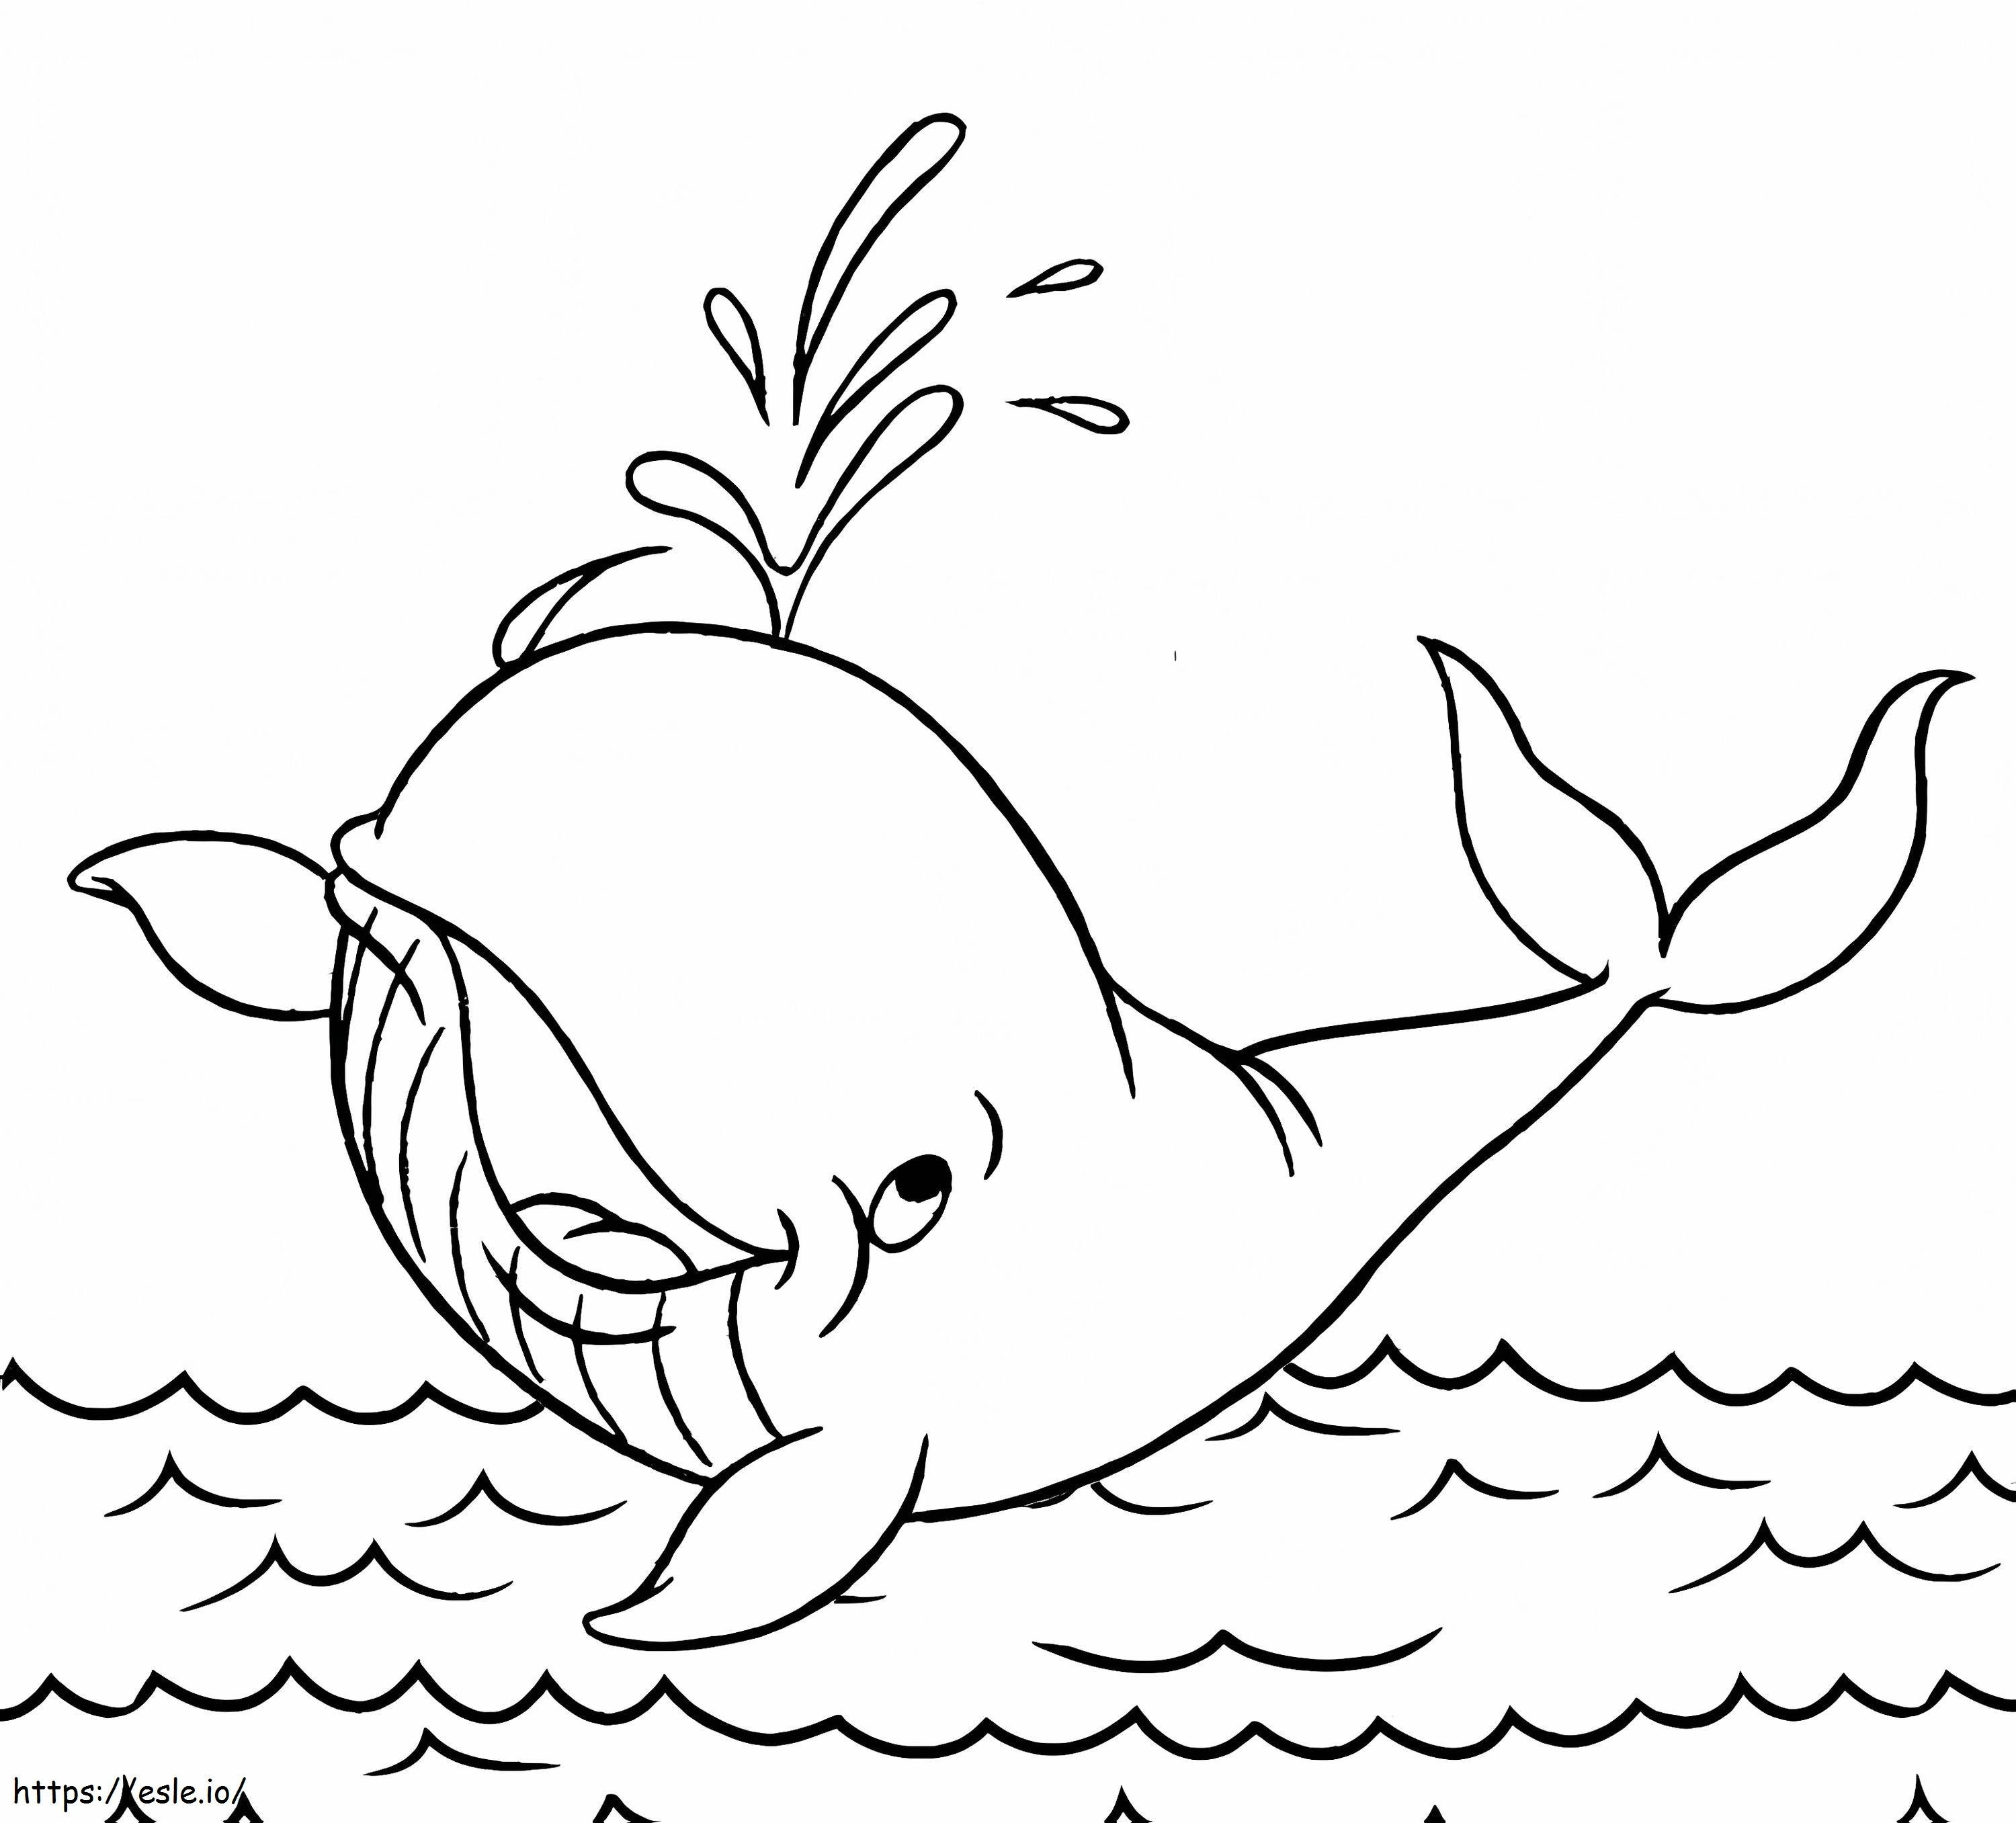 Whale Coloring Sheets Whale Coloring Pictures Whale Printable Whale Templates coloring page